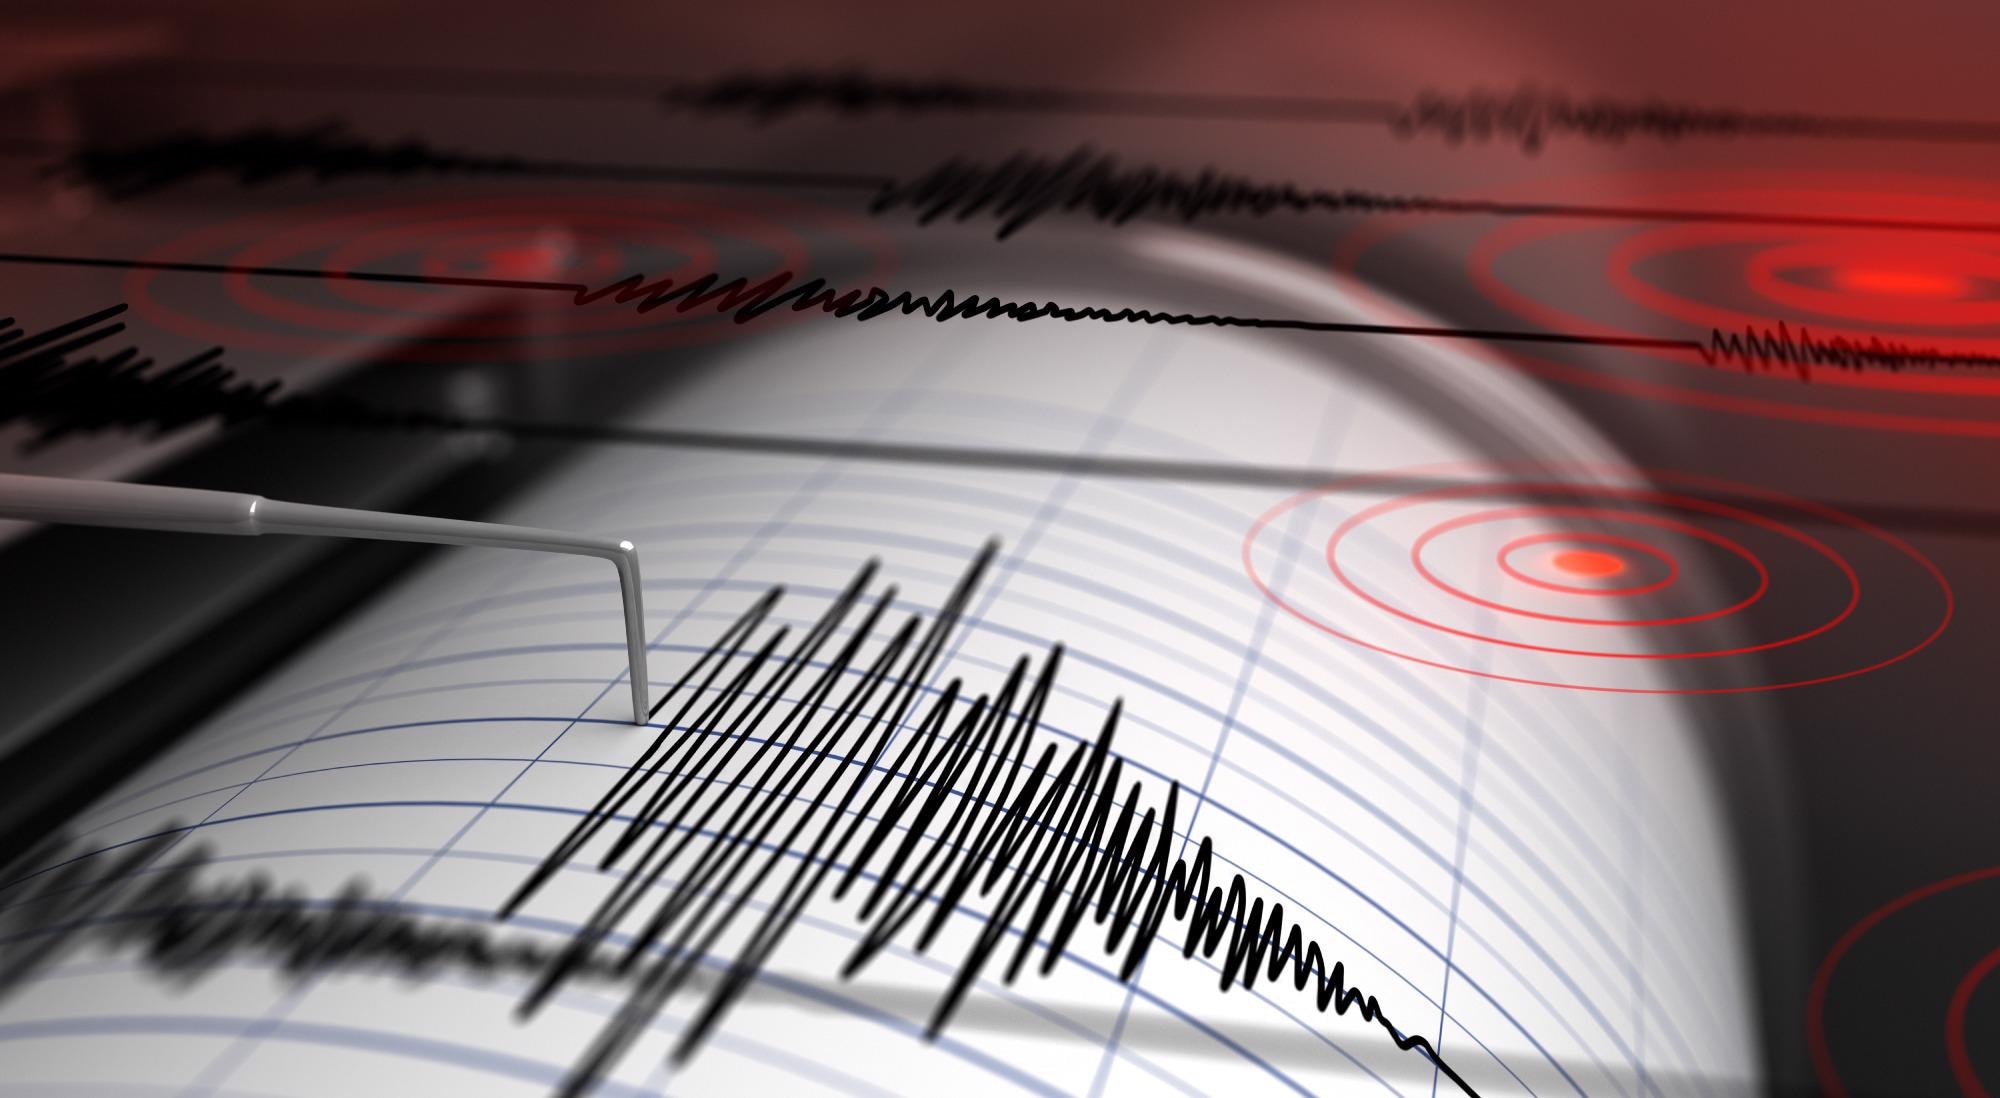 New Type of Induced Earthquake Triggered by Hydraulic Fracturing.